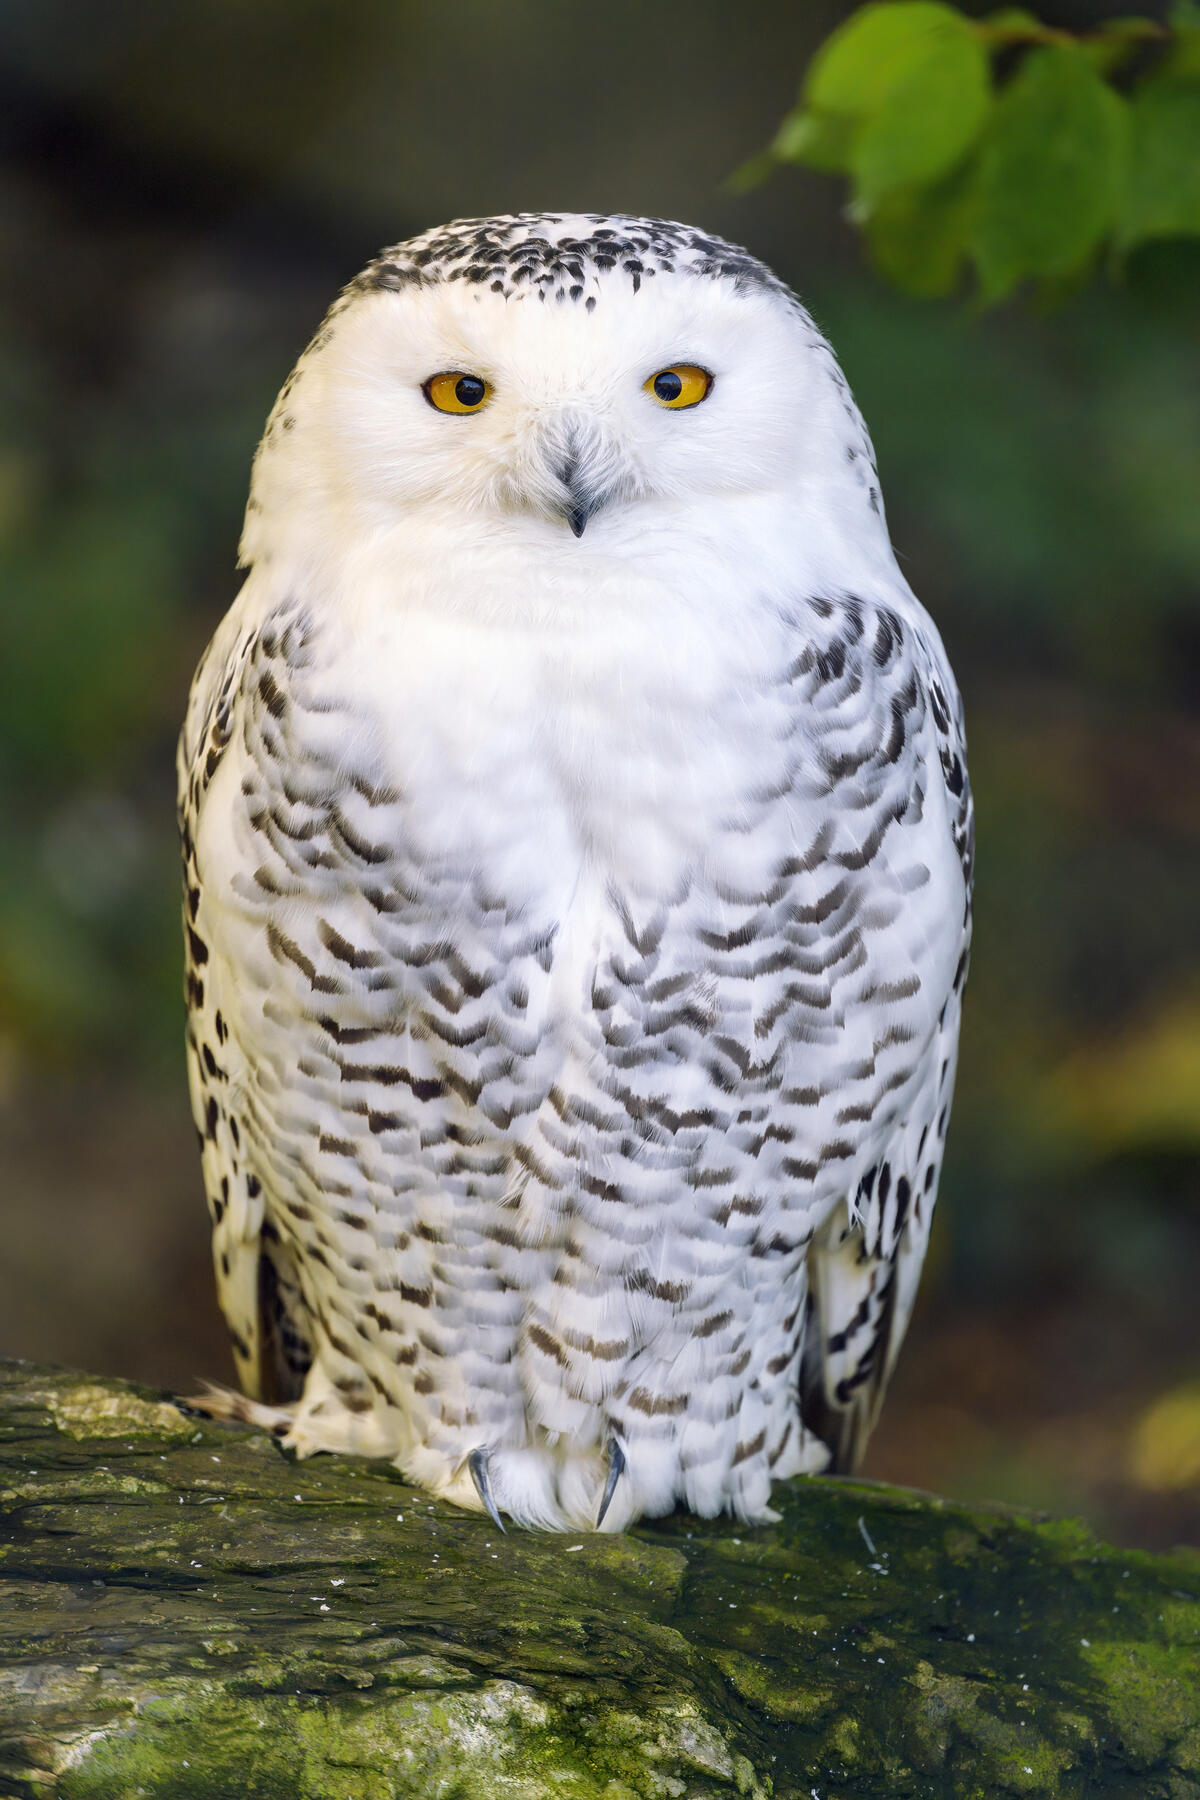 A full-length snowy owl sits on a tree branch